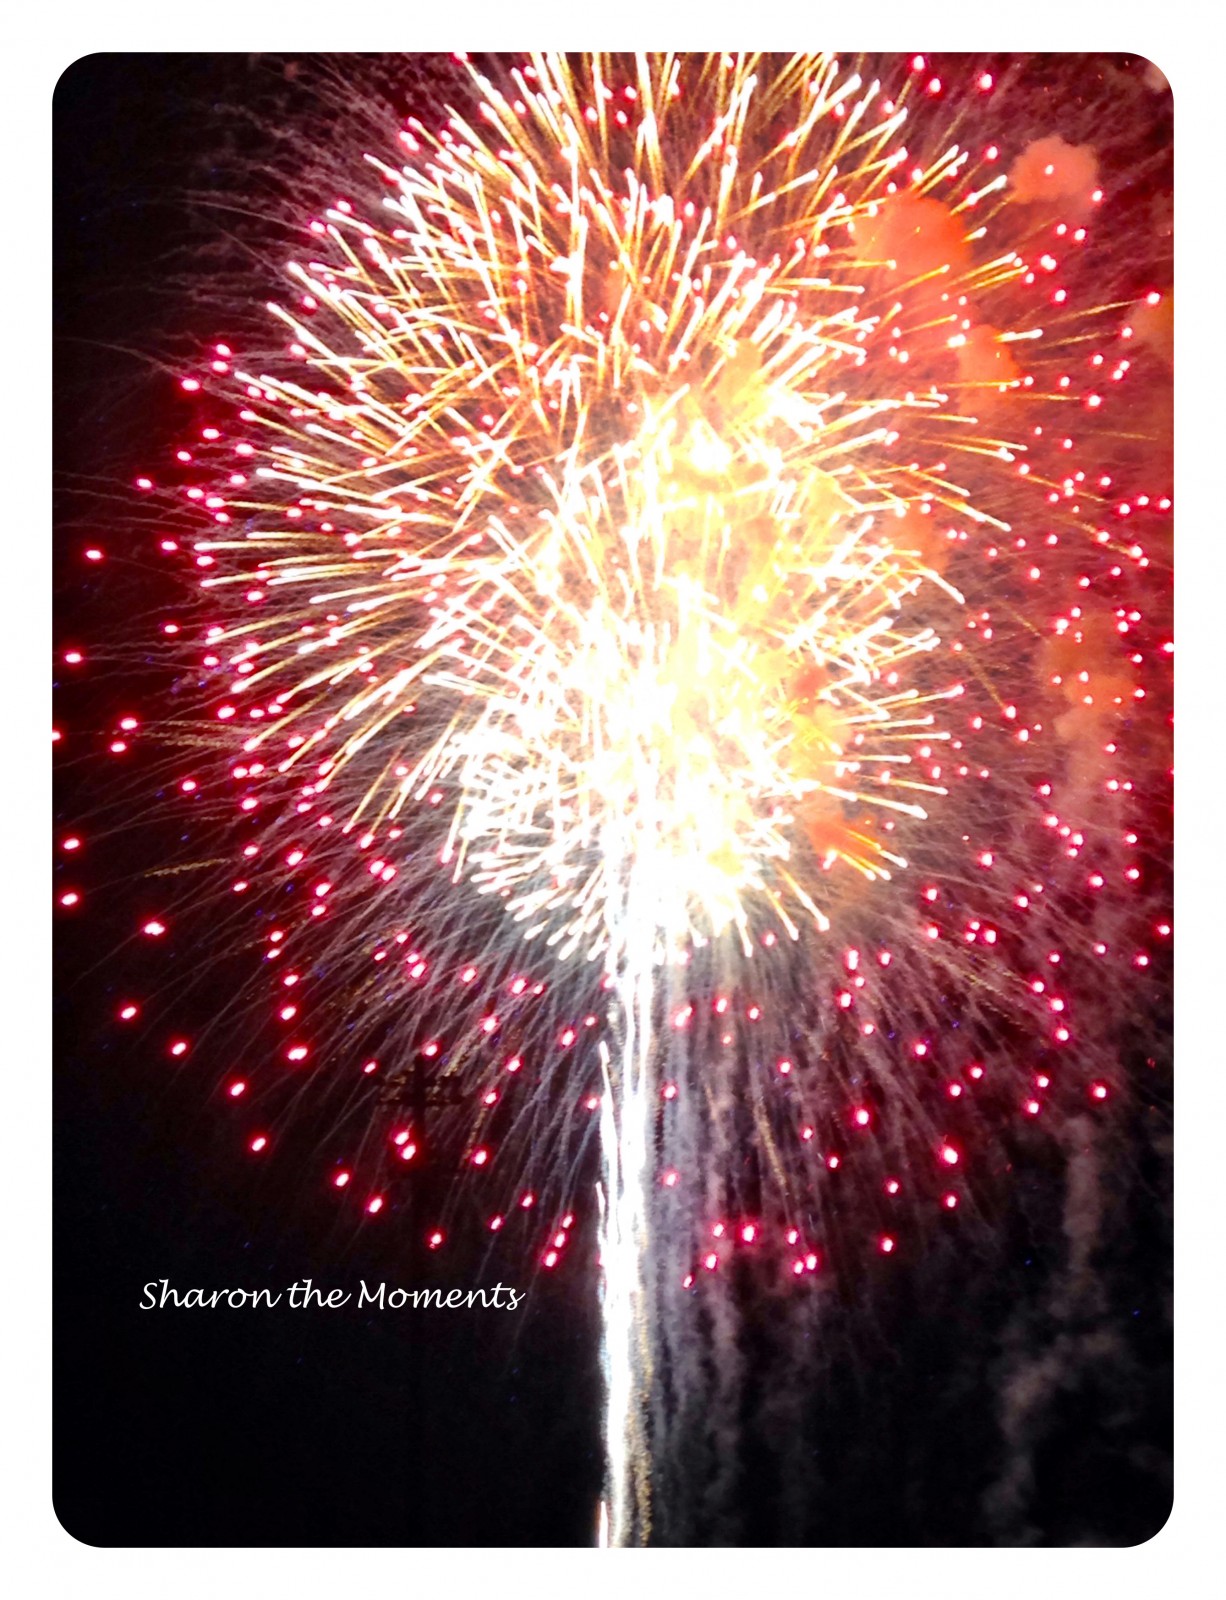 Dublin OH 4th of July Celebration|Sharon the Moments Blog